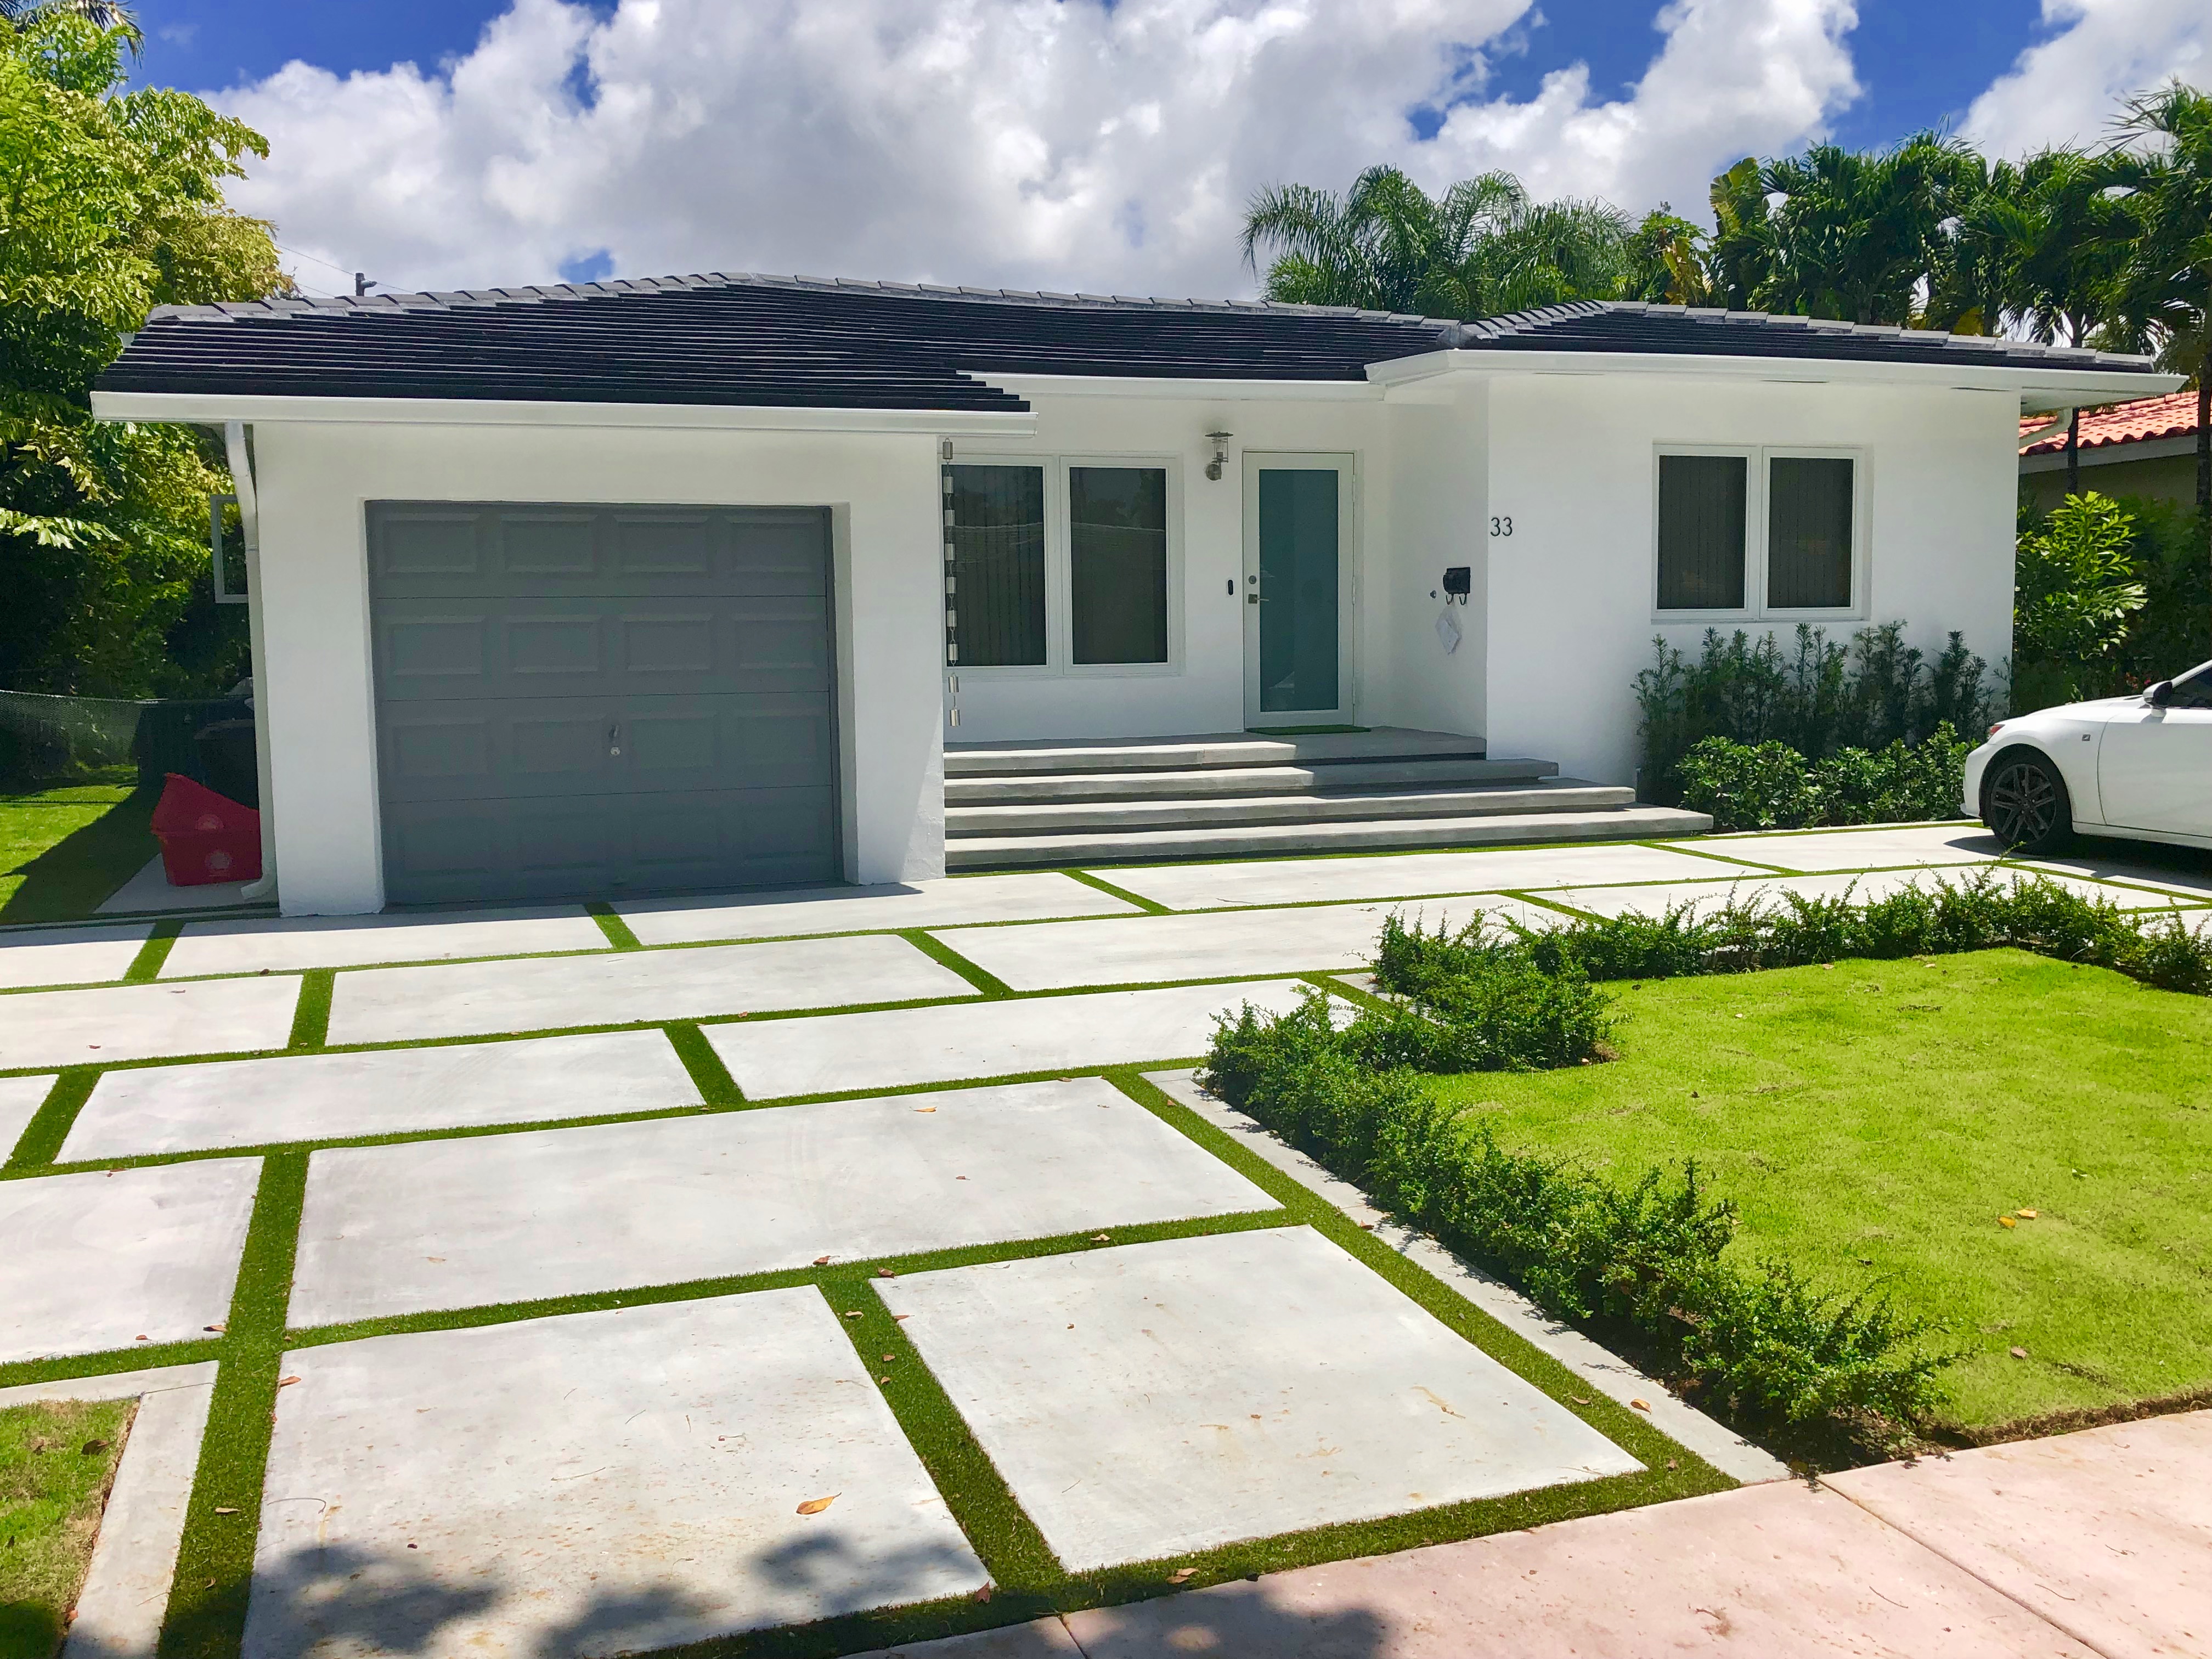 Concrete Driveway with Grass Strips